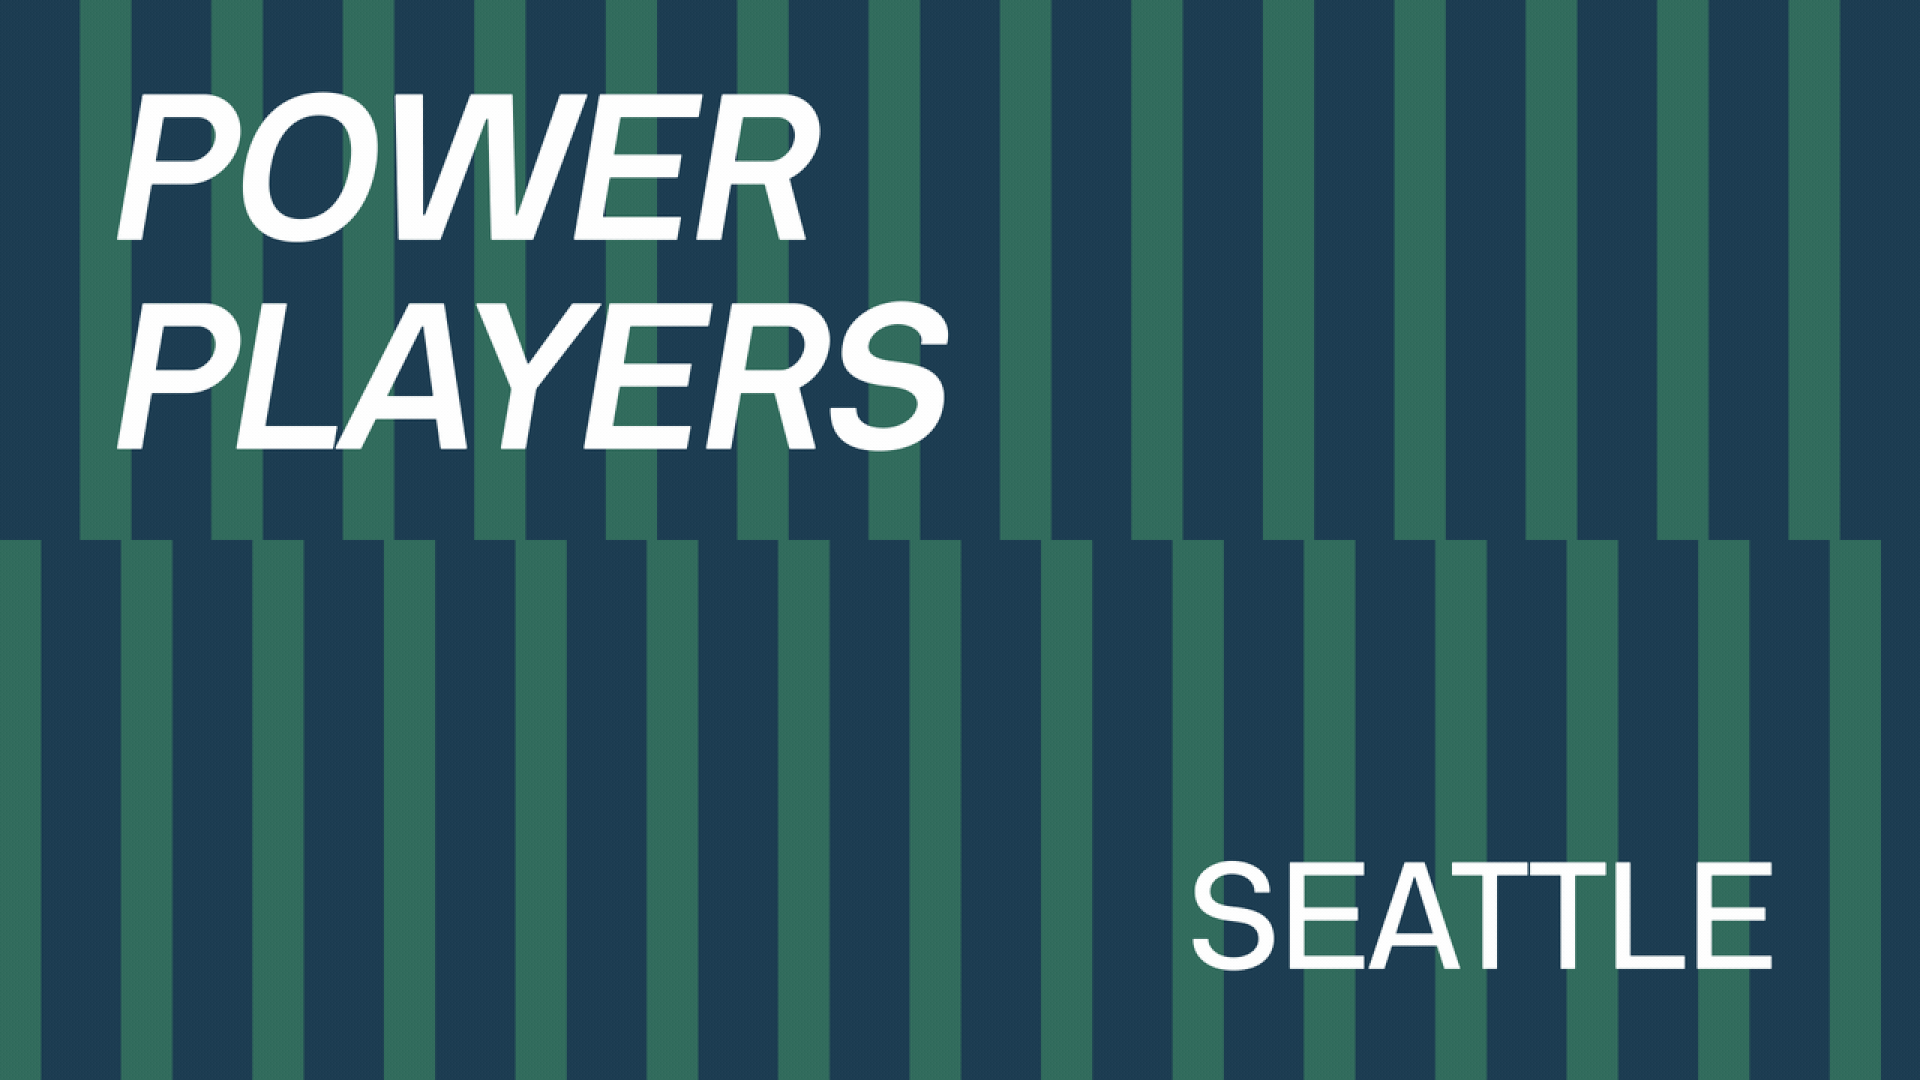 Illustration of two rows of dominos falling with text overlaid that reads Power Players Seattle.